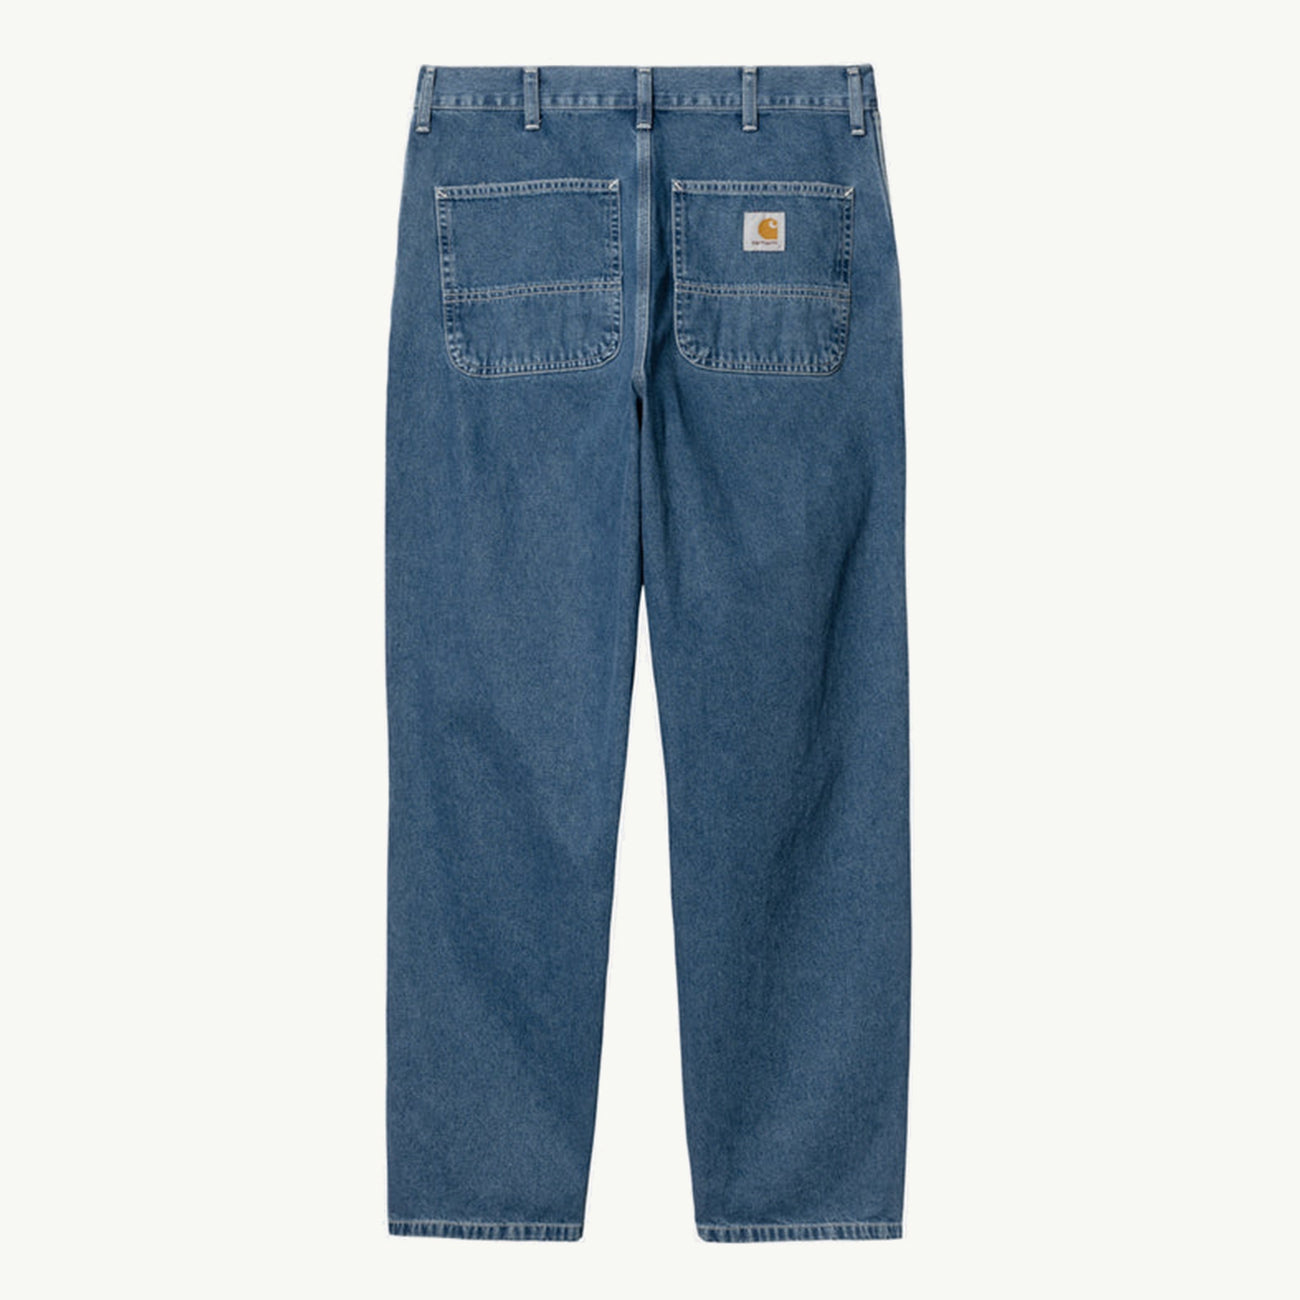 Simple Pant - Blue Stone Washed